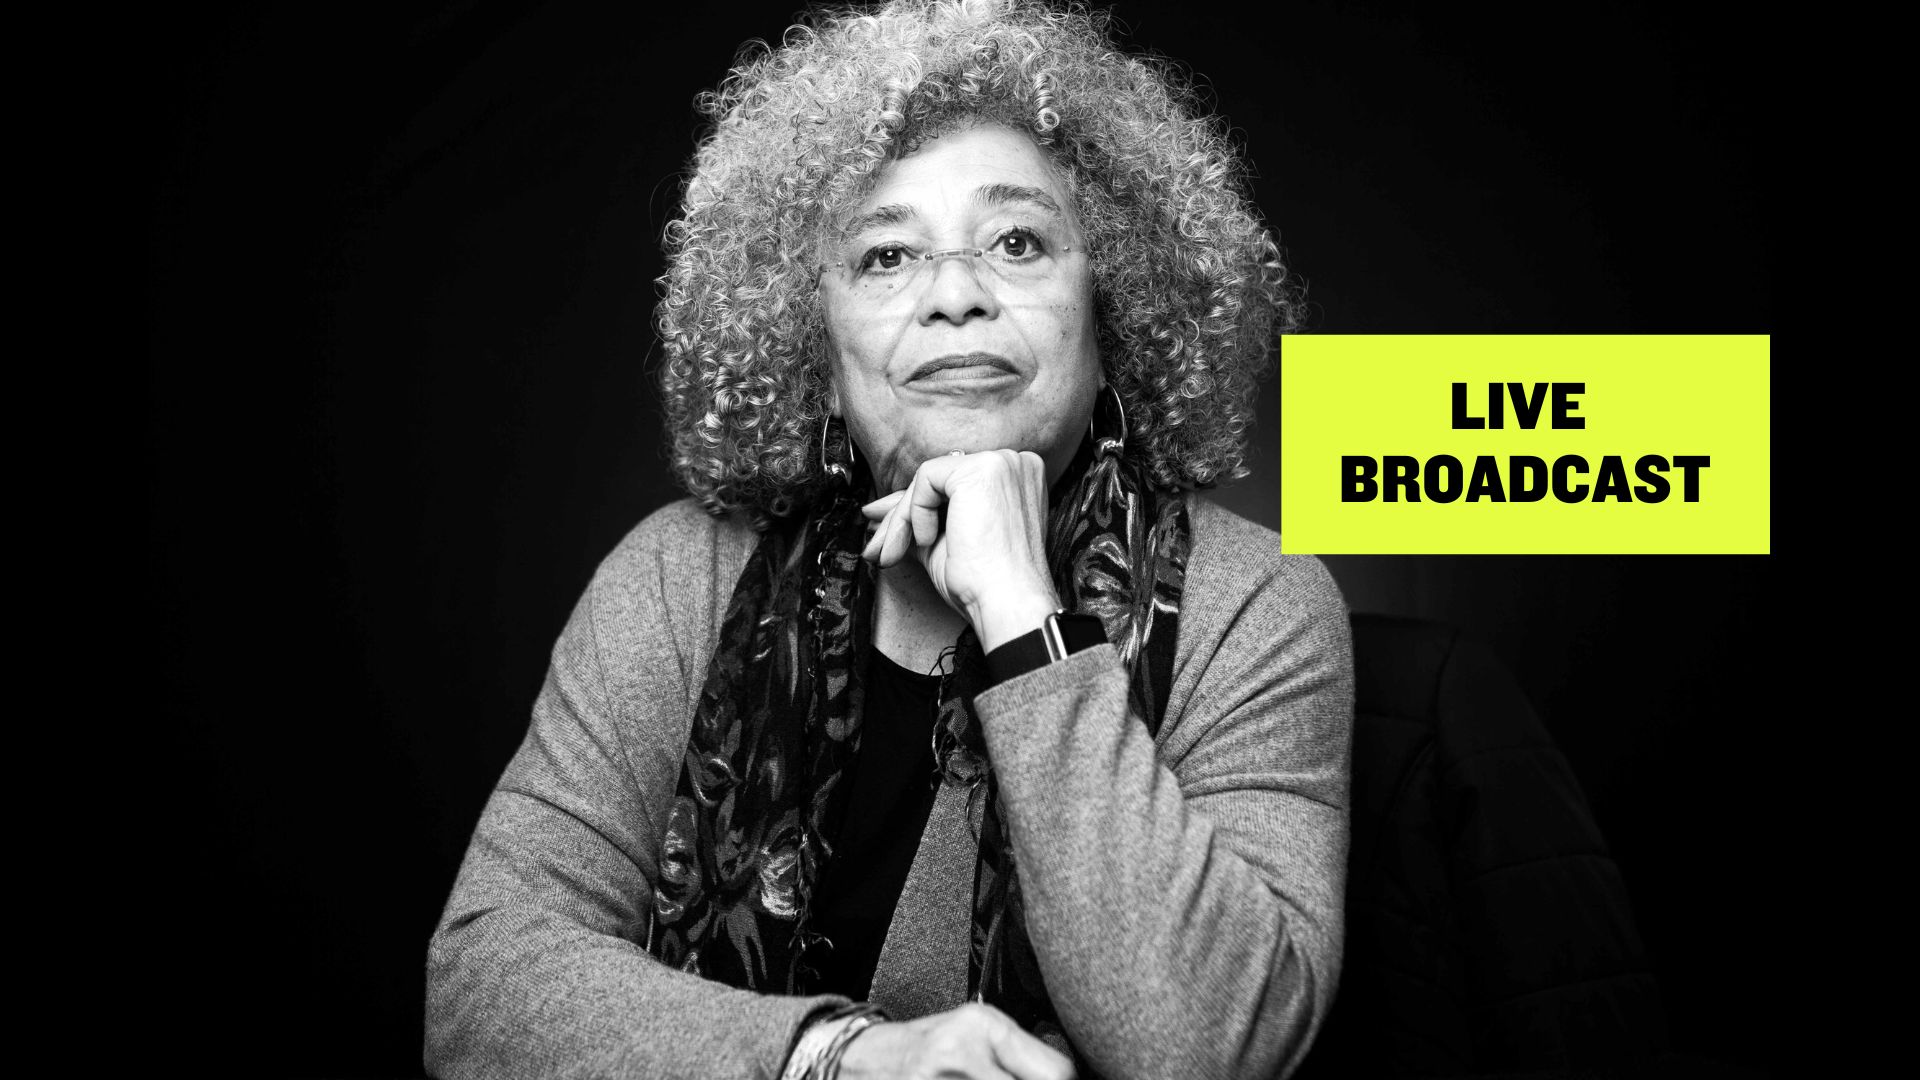 Angela Davis image with a Live Broadcast sign in yellow